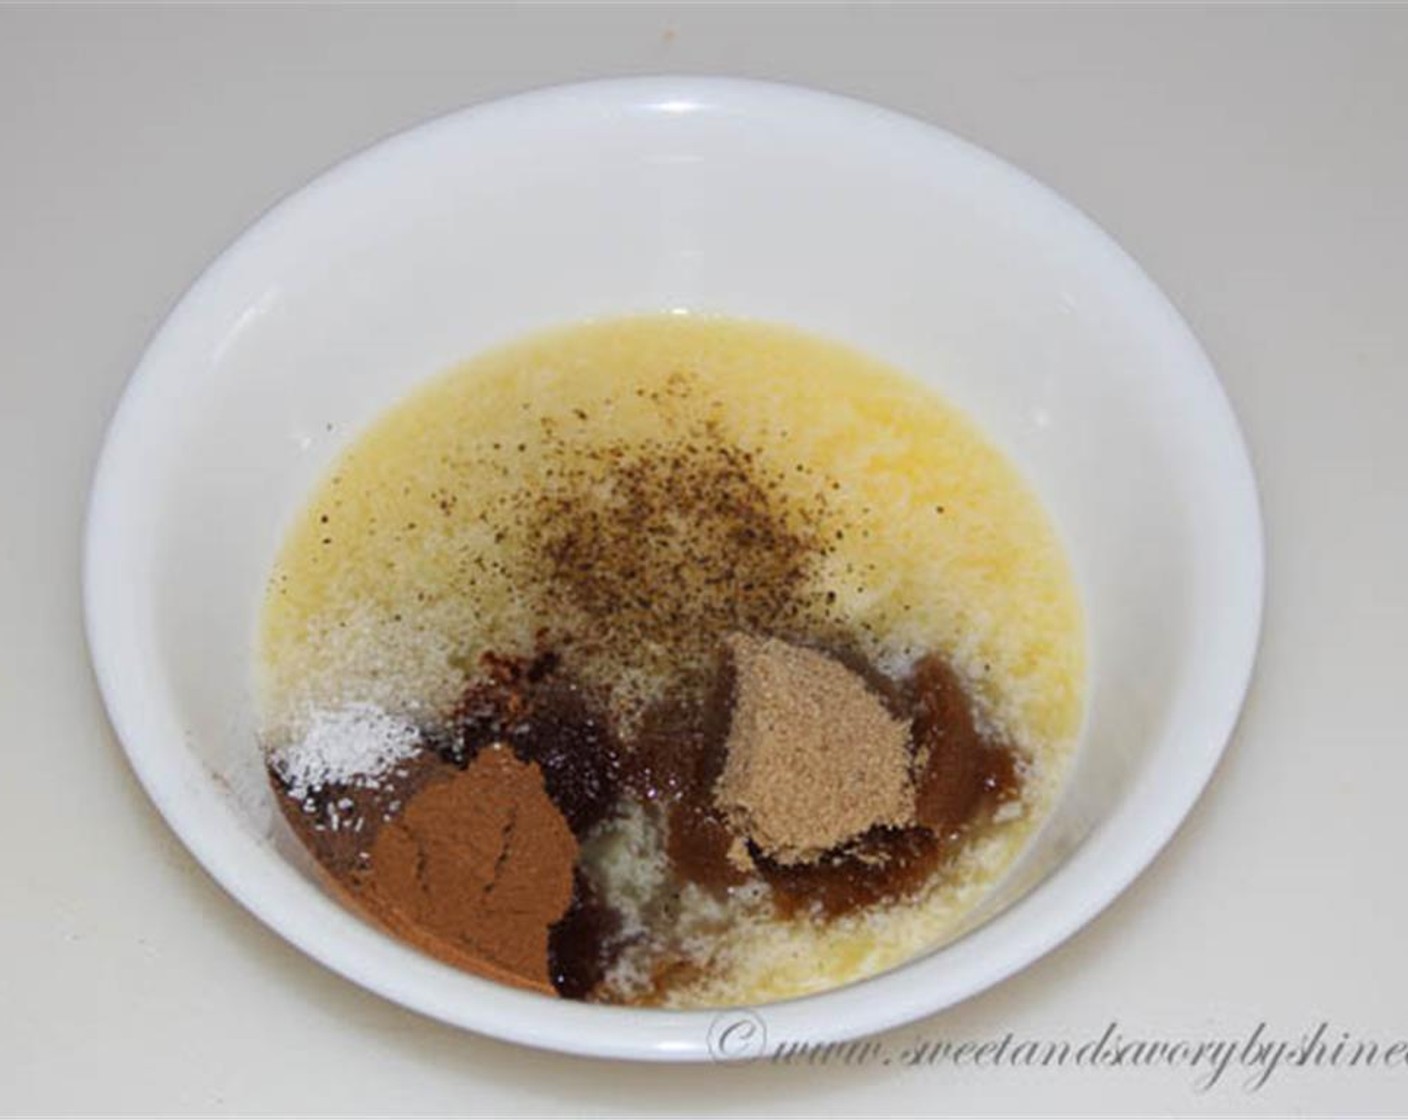 step 5 In a small bowl, mix together Ground Cinnamon (1 tsp), Ground Allspice (1/4 tsp), Brown Sugar (1/4 cup), Kosher Salt (1/4 tsp), and melted Unsalted Butter (1/4 cup).